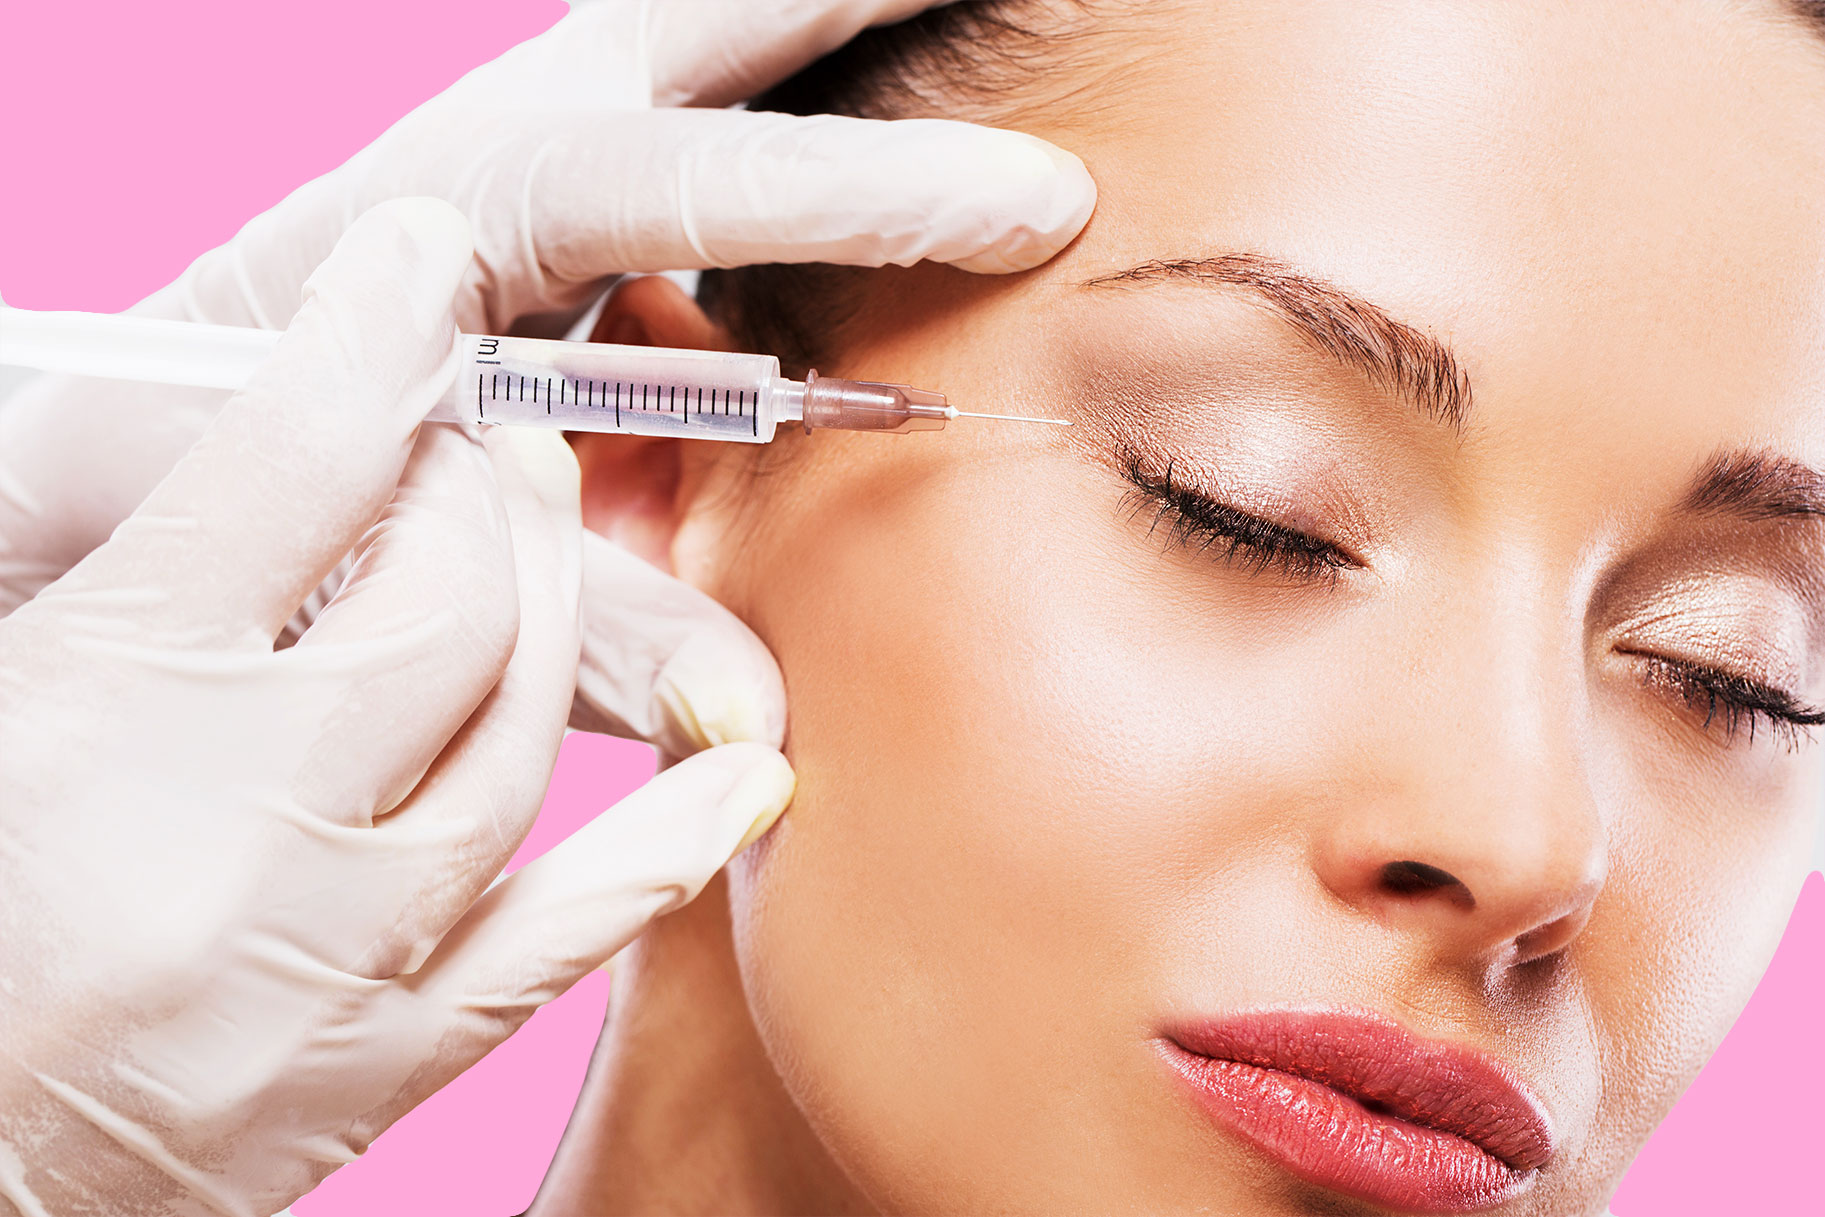 Botox Might Help With Acne